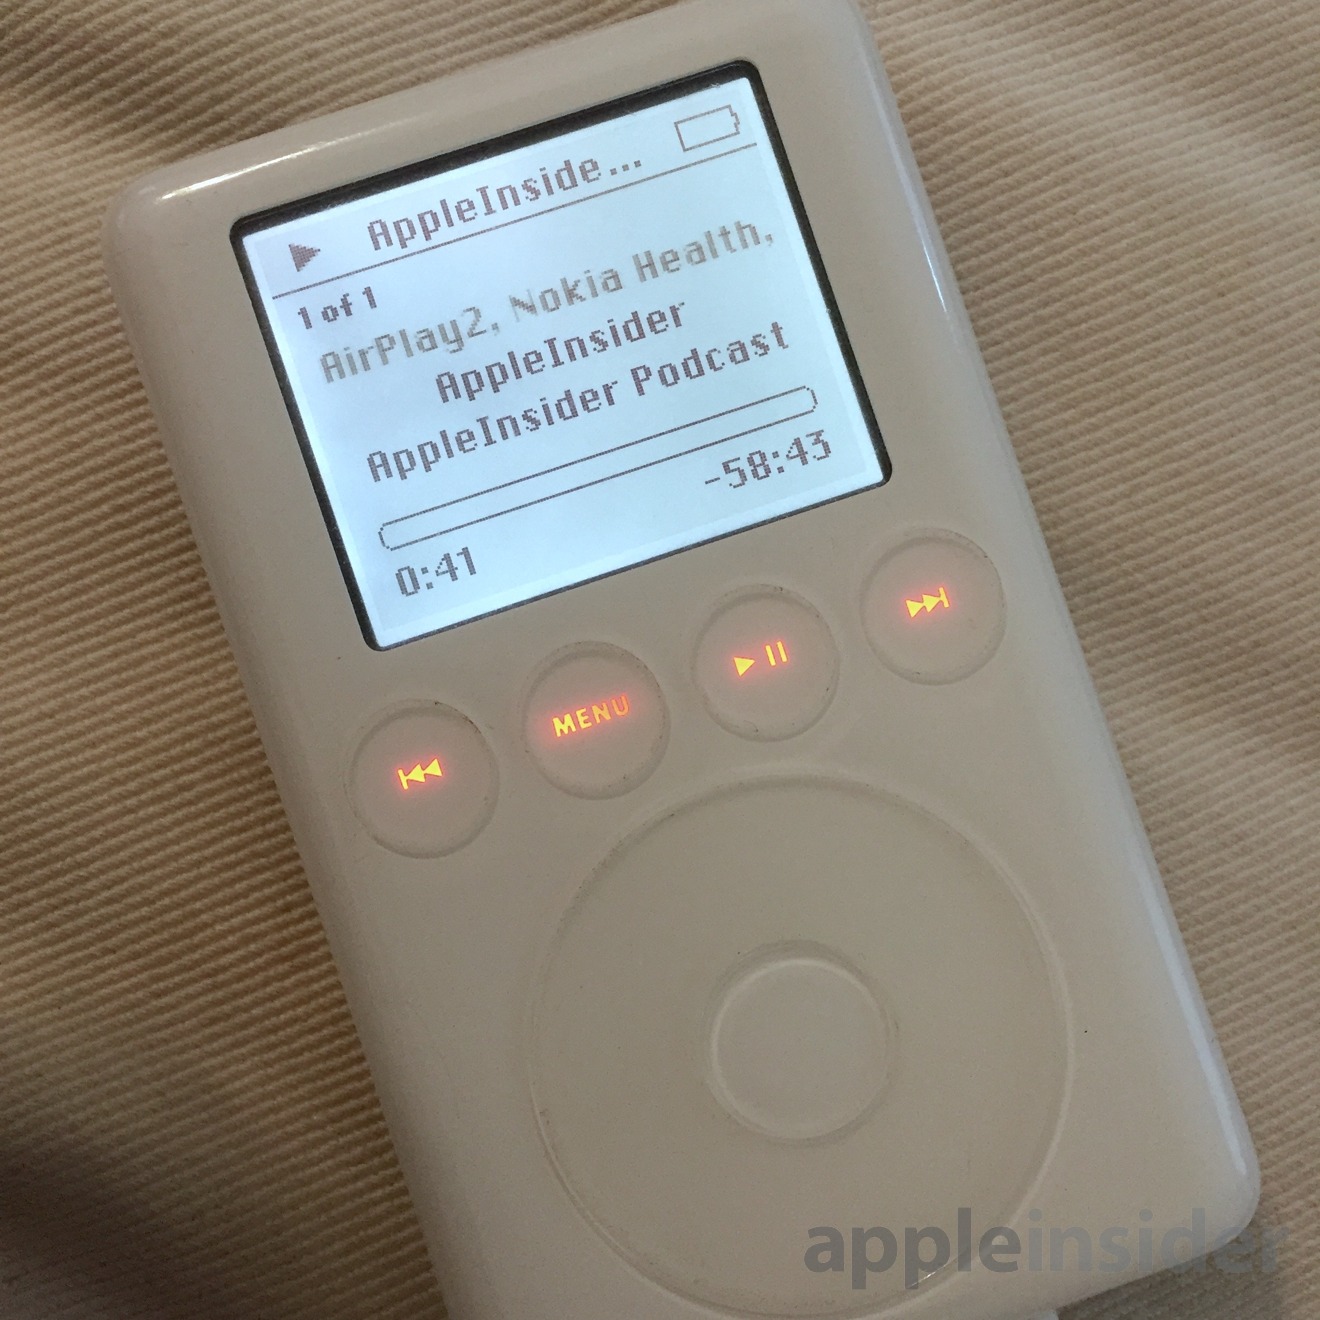 Download Spotify On Old Ipod Touch